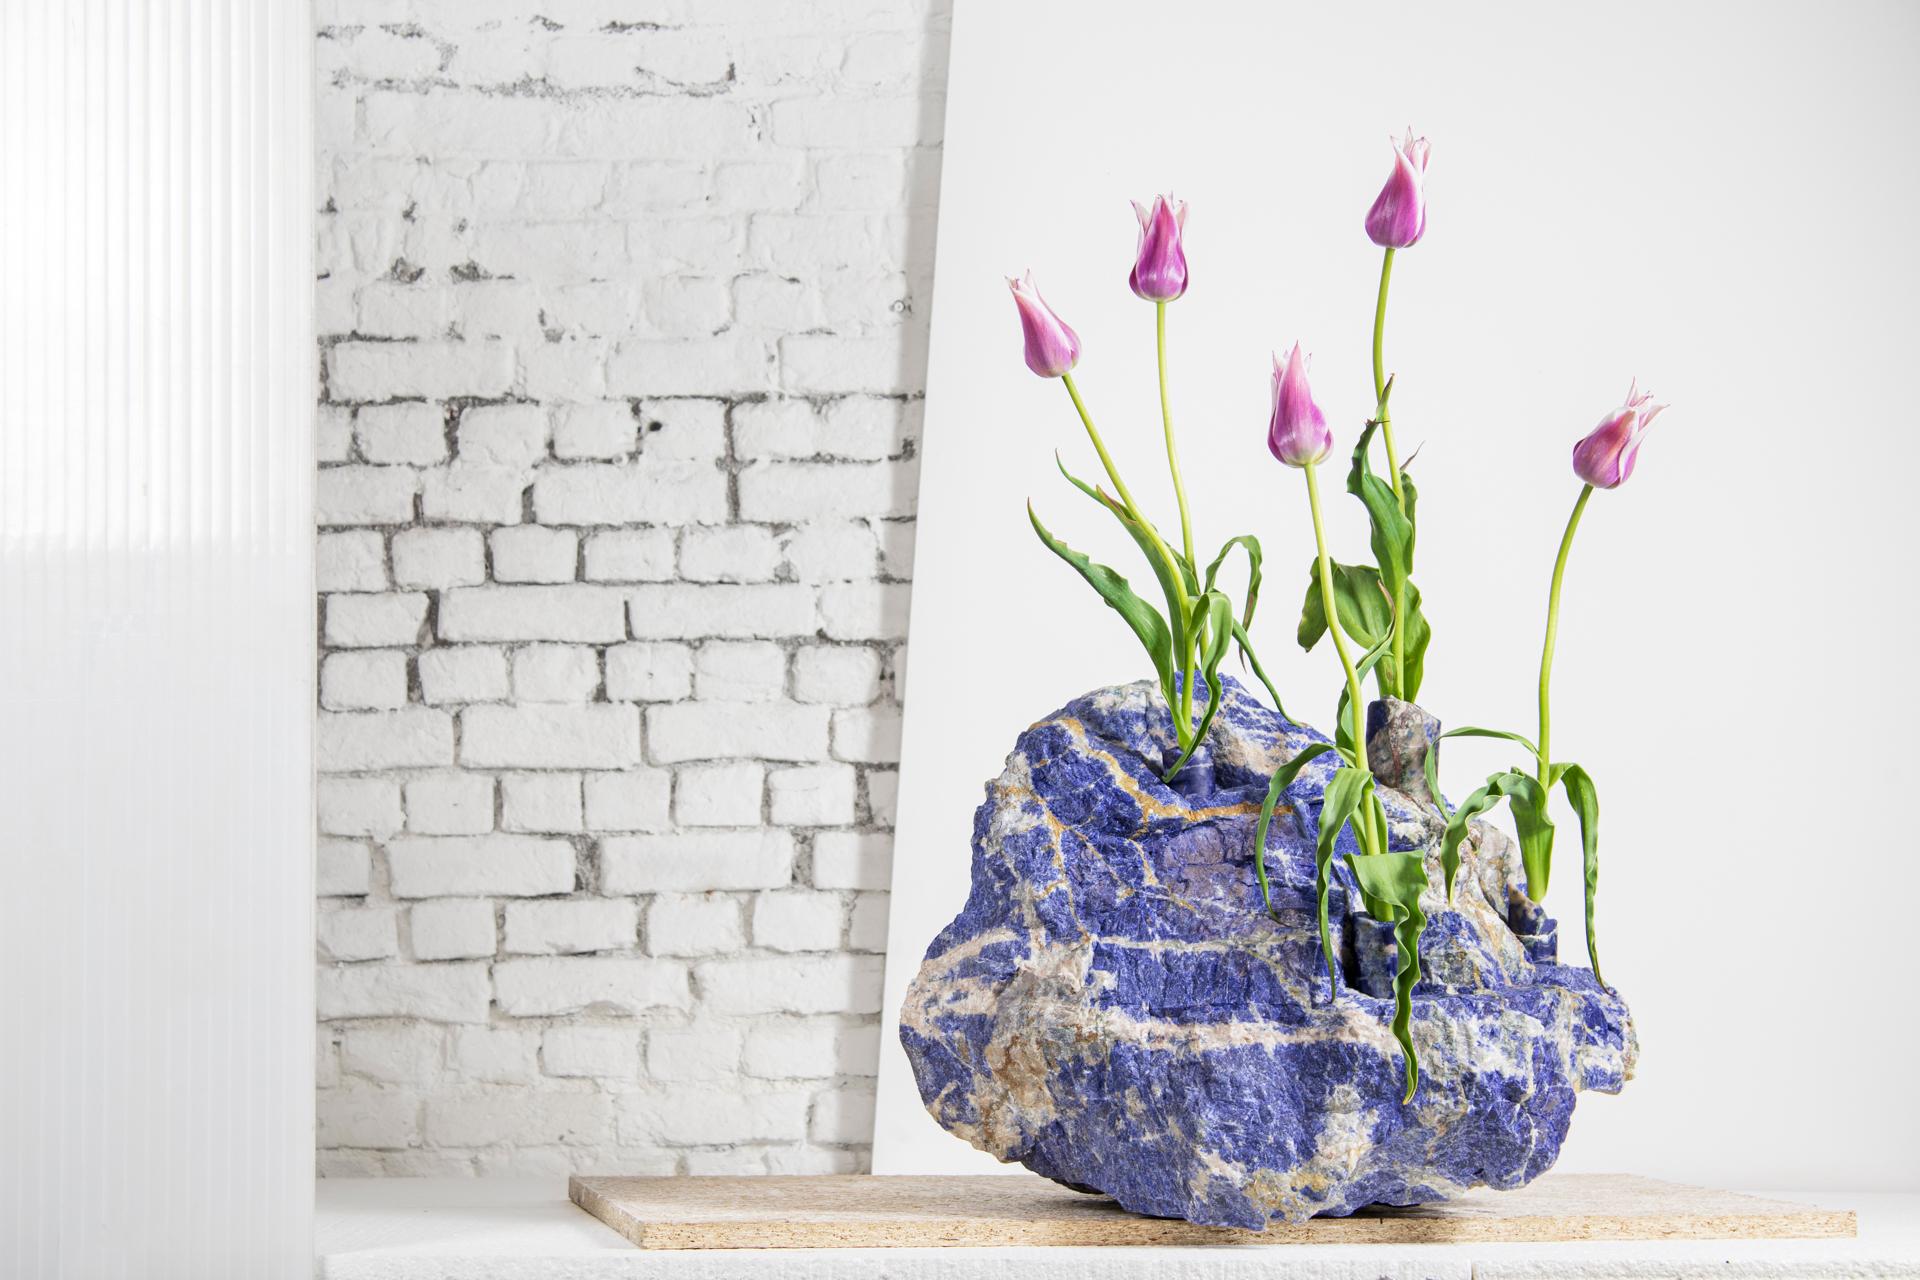 Large Sodalite Tulip Vase by Studio DO
Dimensions: D 55 x W 36 x H 41 cm
Materials: Sodalite, stainless steel.
109 kg.

Flowers are intrinsically connected with composition and earth.
Influenced by varied vessels from past to present such as the